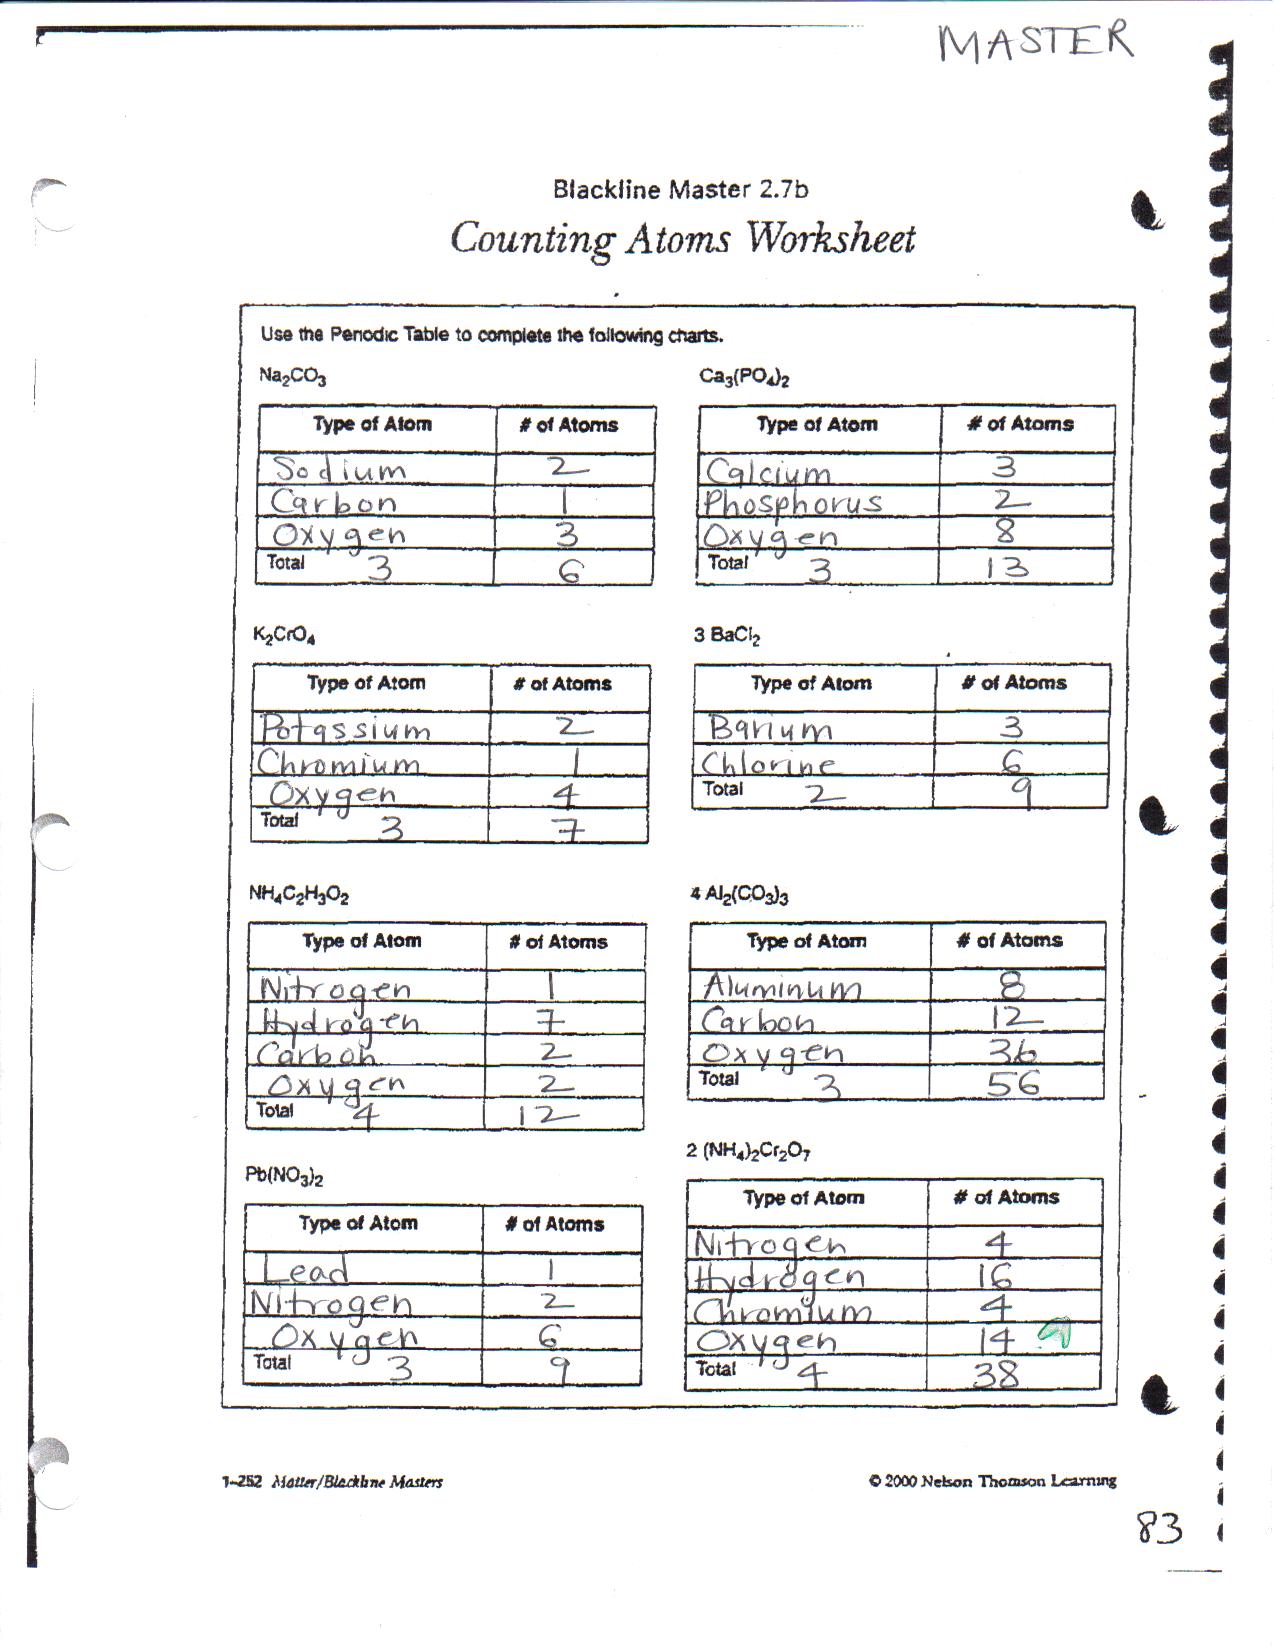 counting-atoms-worksheet-answers-8th-grade-tutore-org-master-of